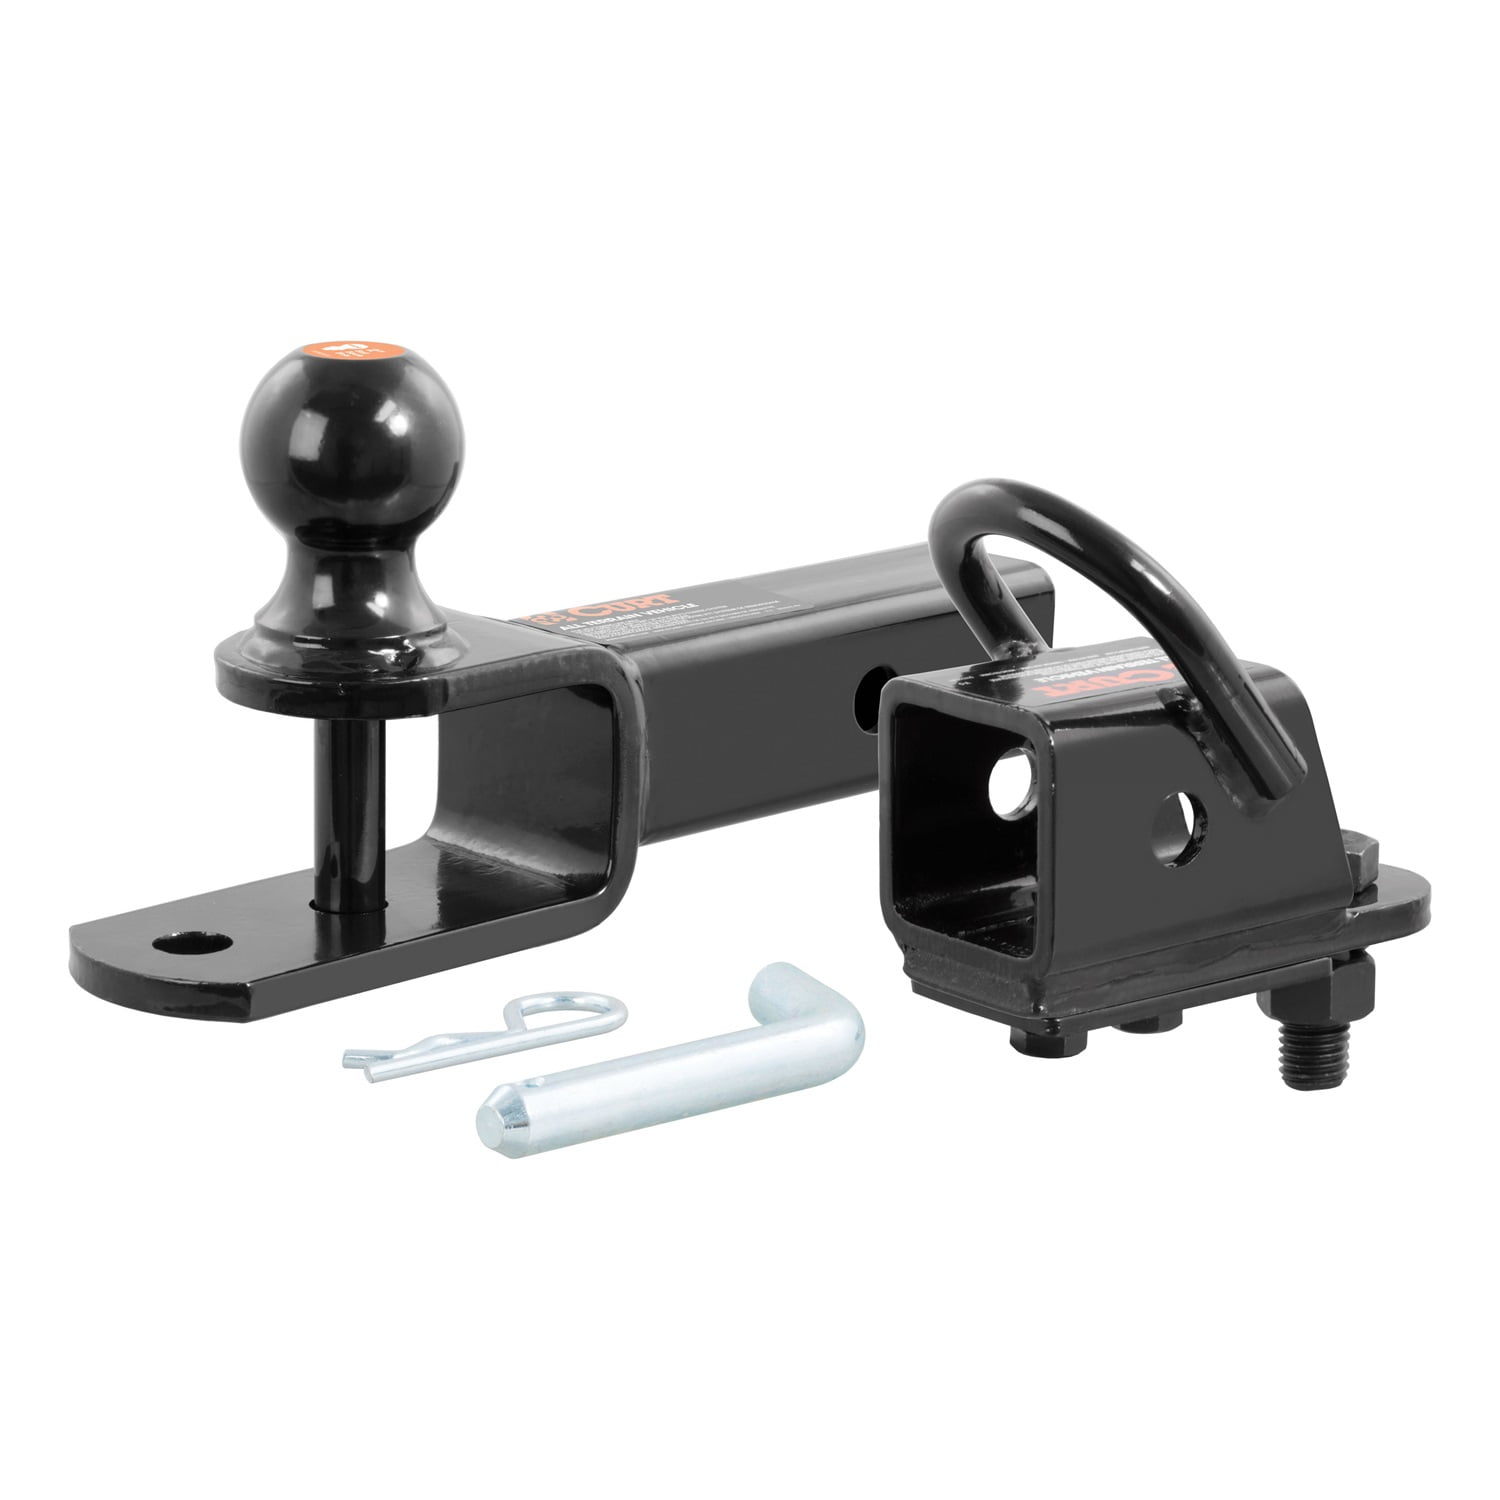 Curt In Utv Atv Trailer Hitch Mount With Inch Receiver Adapter Inch Ball Clevis